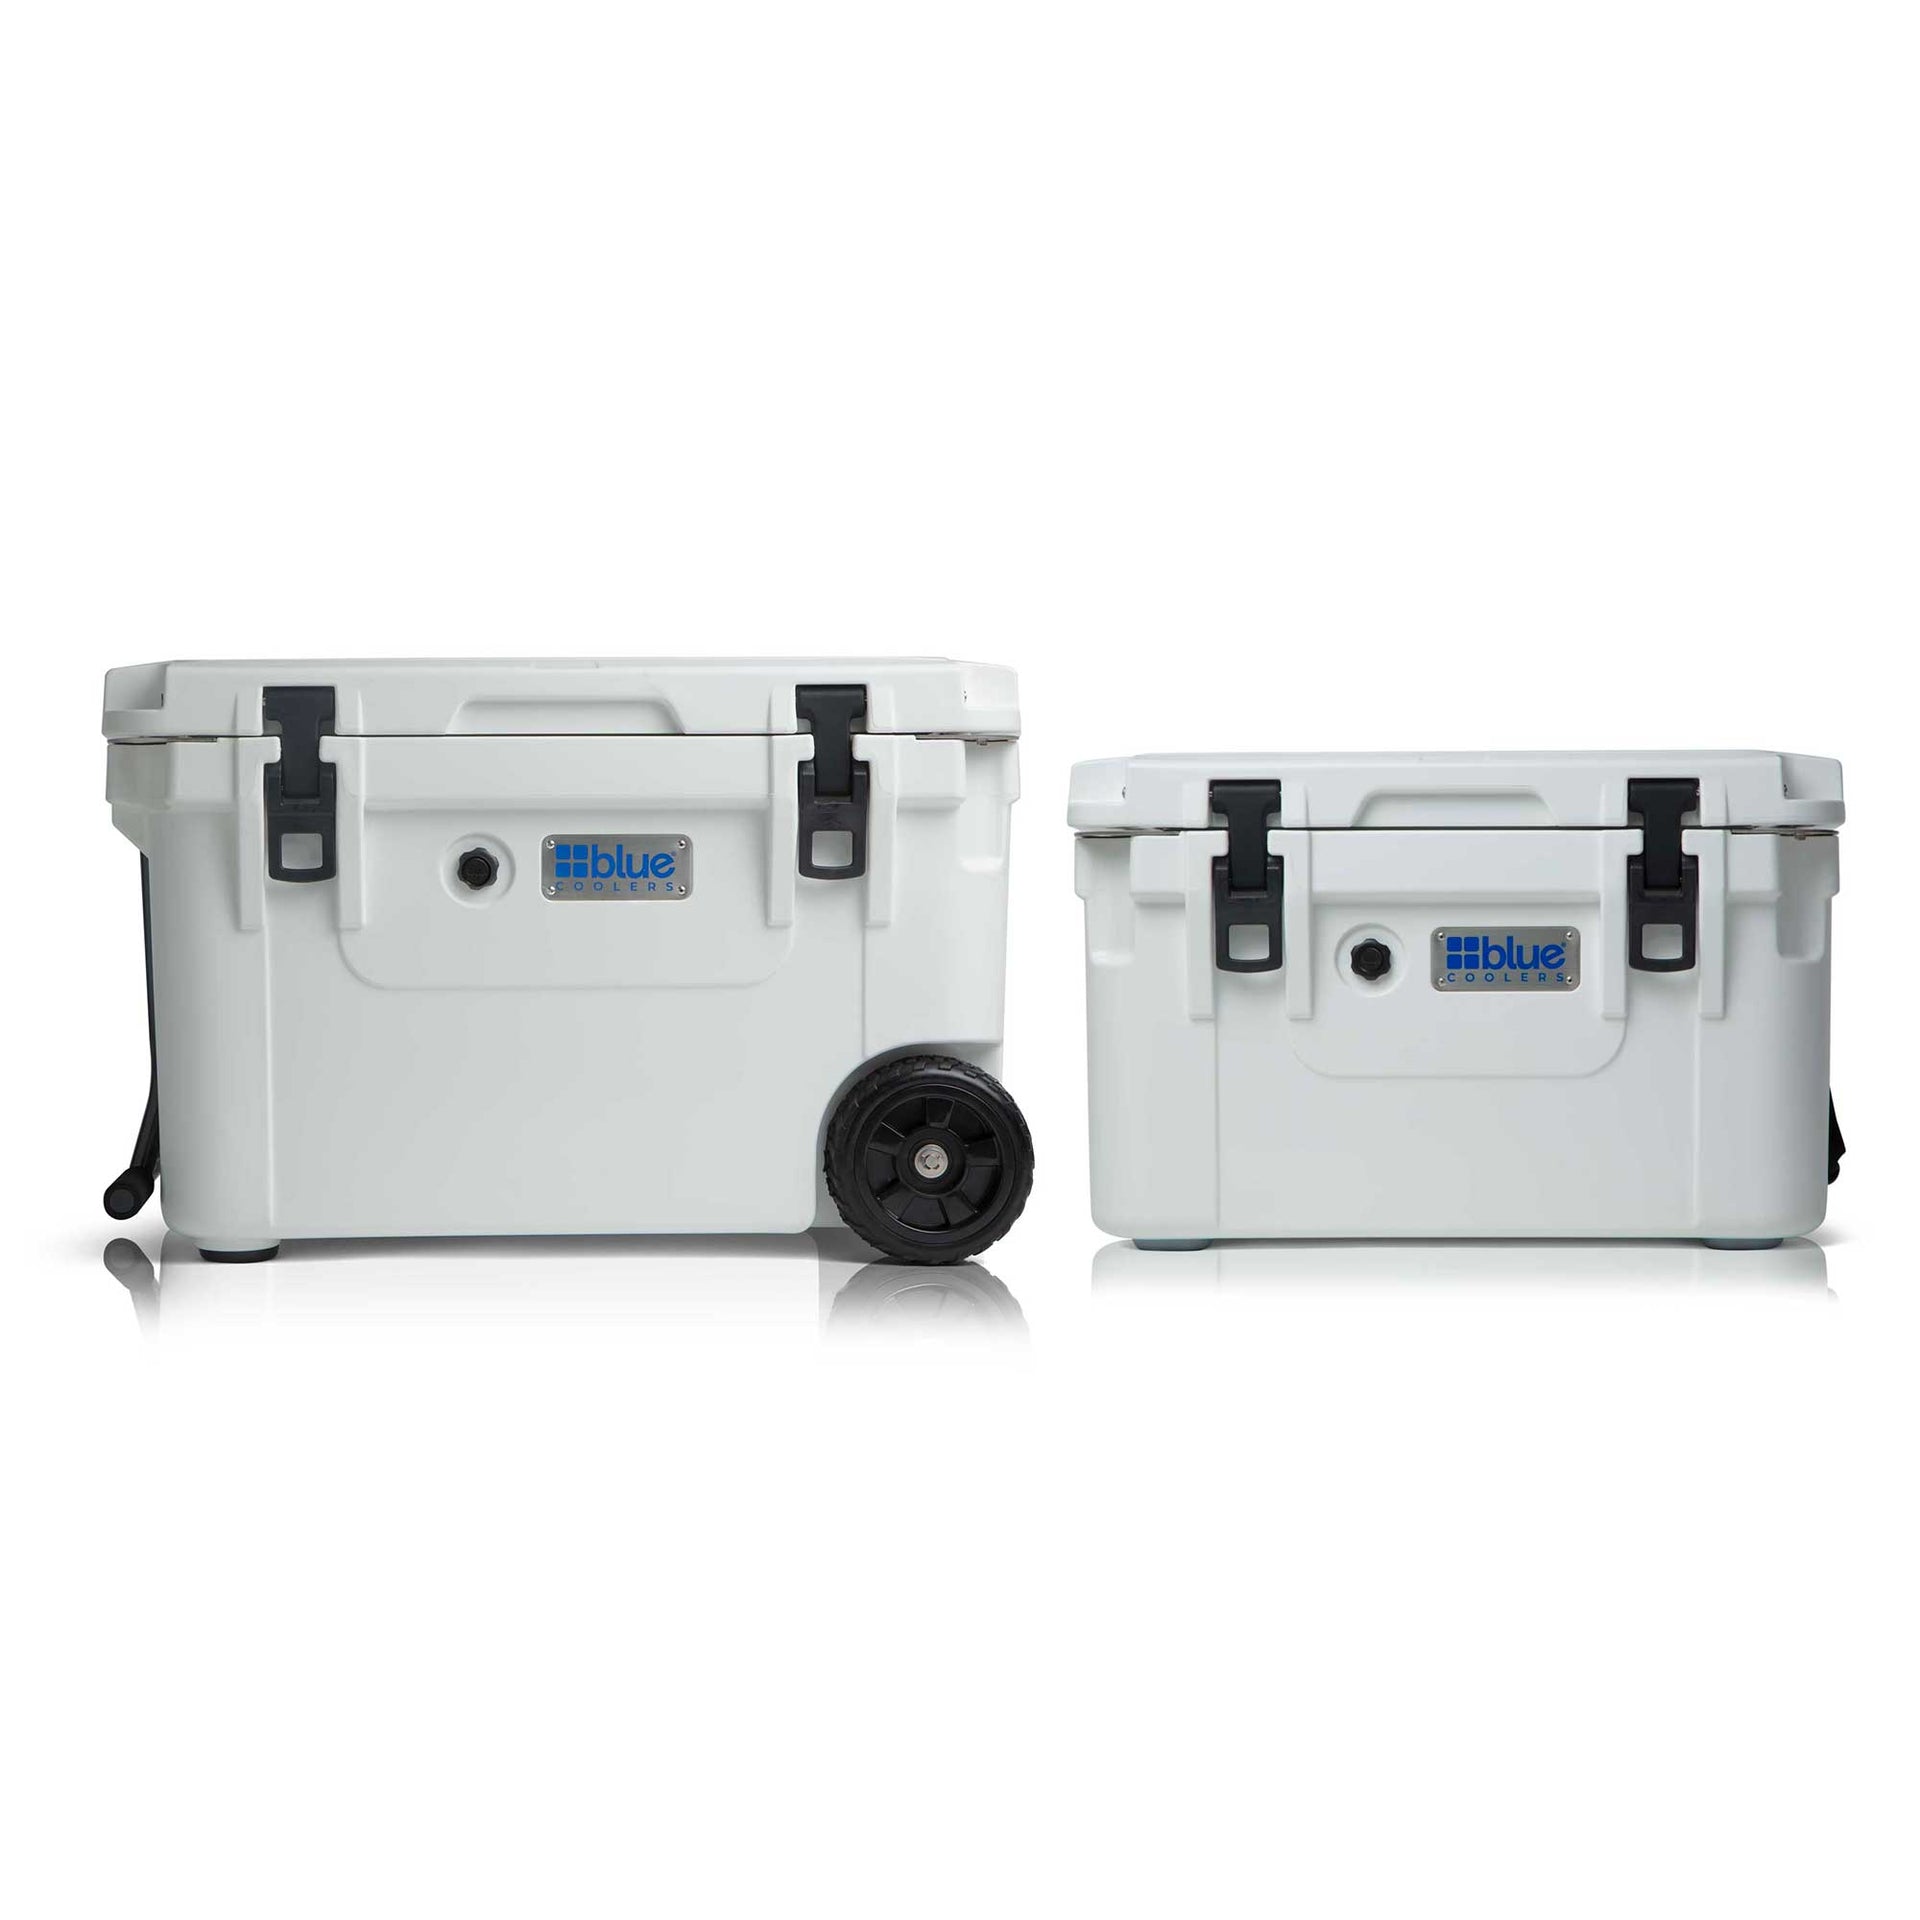 Roto-molded Coolers